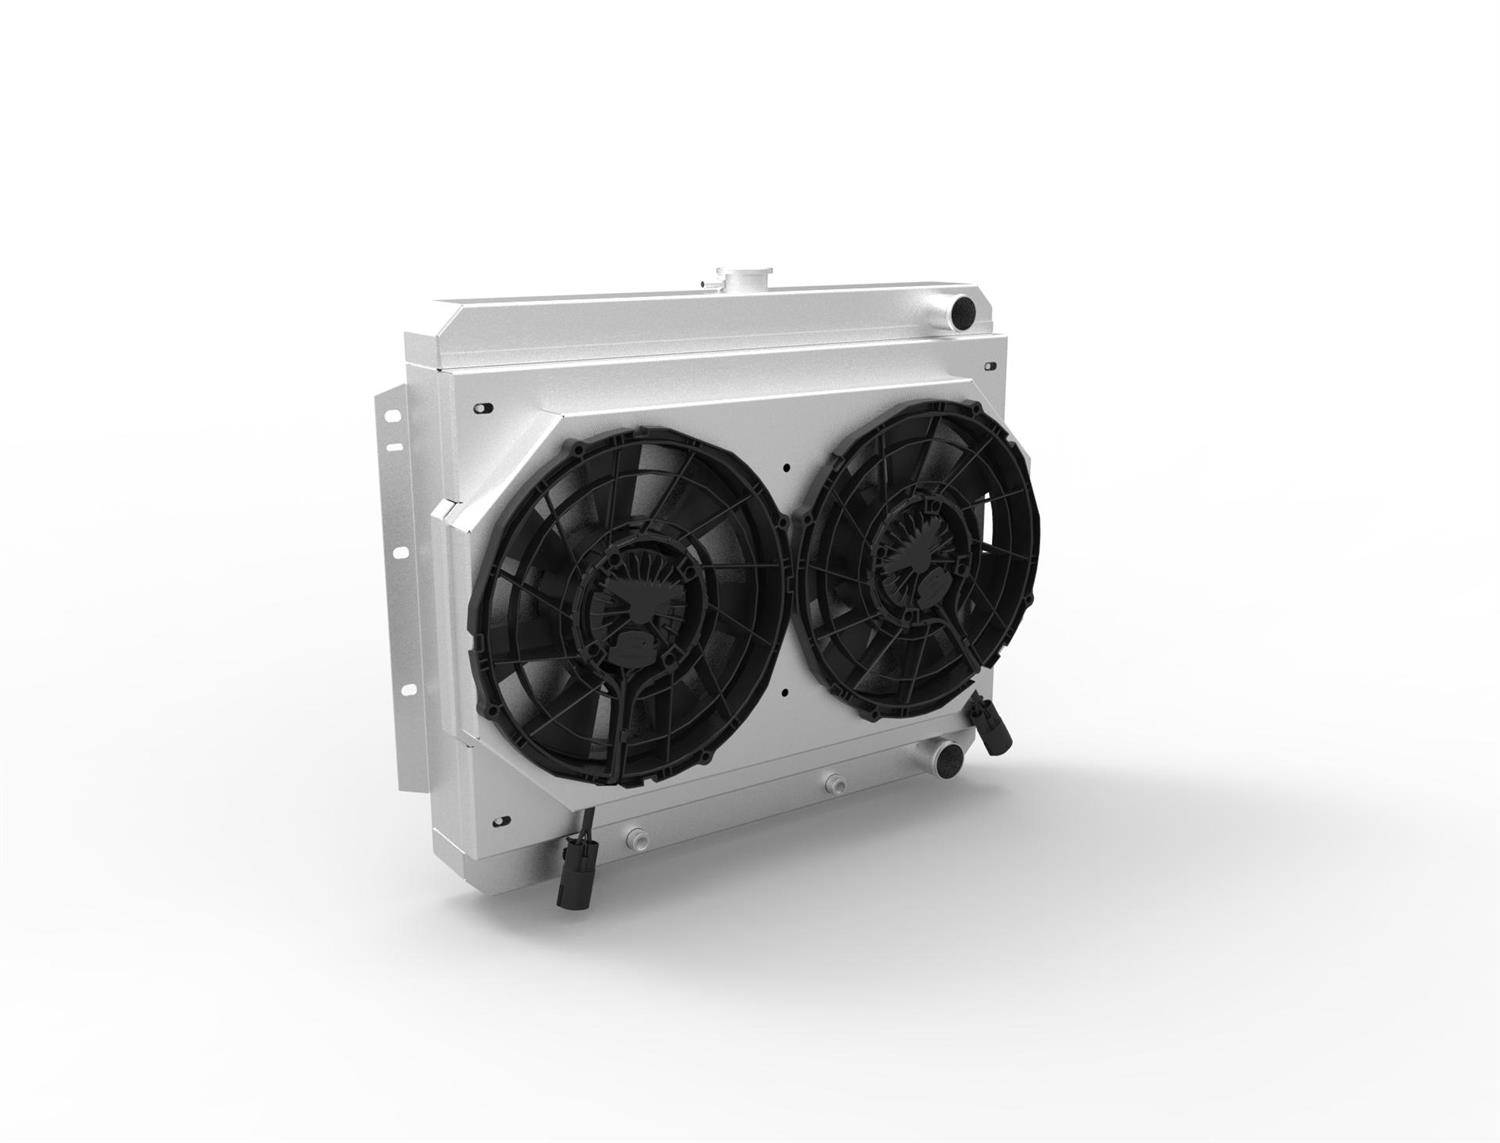 Wizard Cooling Inc - Wizard Cooling - 1959-1960 Chevrolet Bel Air/ Impala (17.5" Core) w/ Brushless Fan & Shroud - 10268-212BL